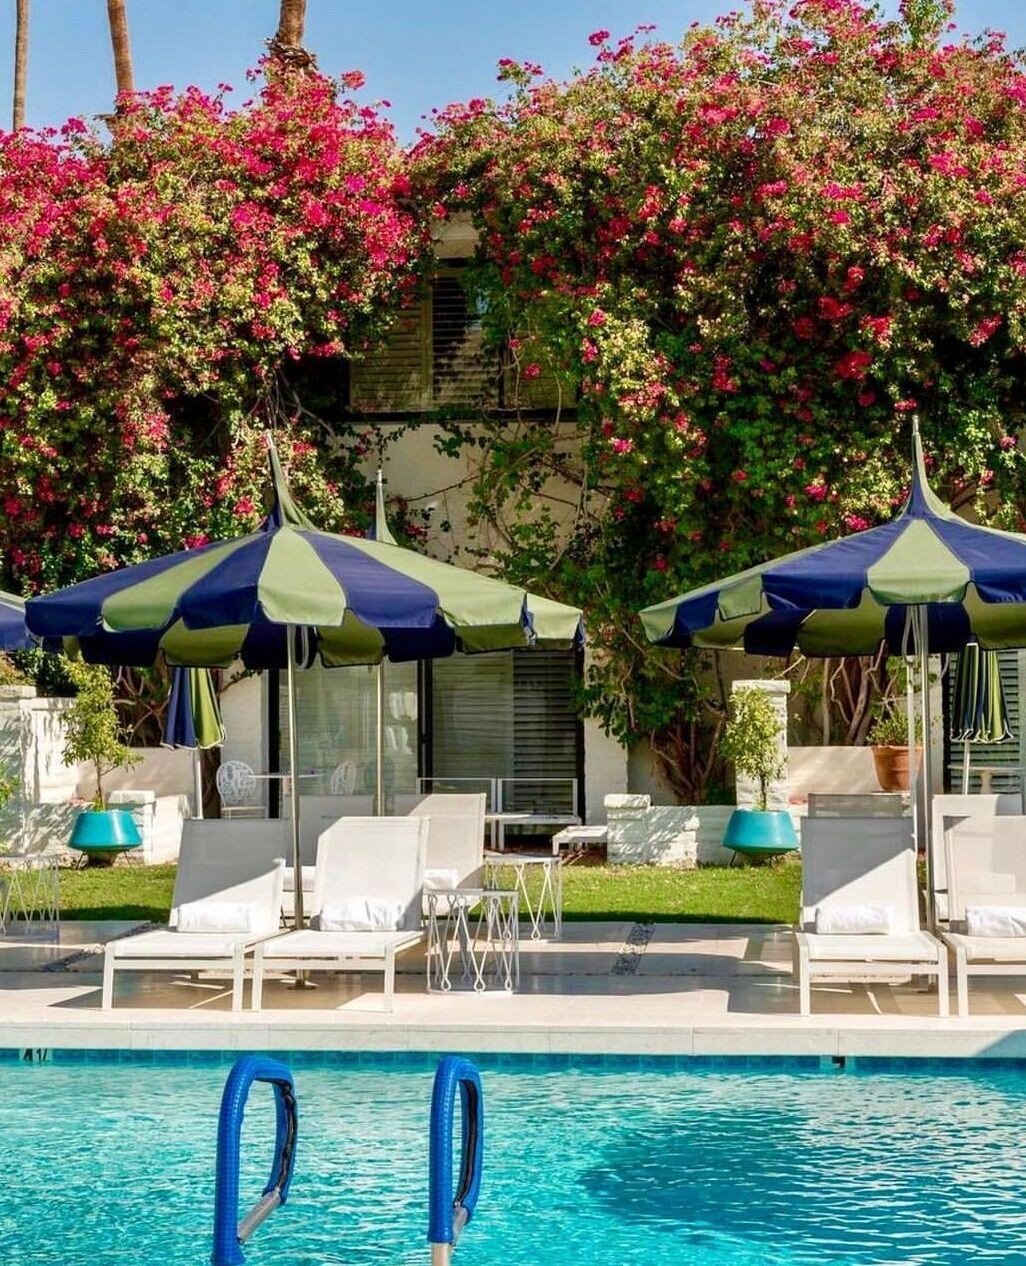 We're dreaming of warmer temps by the @parkerpalmsprings pool...The hotel embodies the quintessential palm springs vibe with its mid-century modern design (with interiors by @jonathanadler), bright colors, and swaying palm trees. Who's ready for a lo